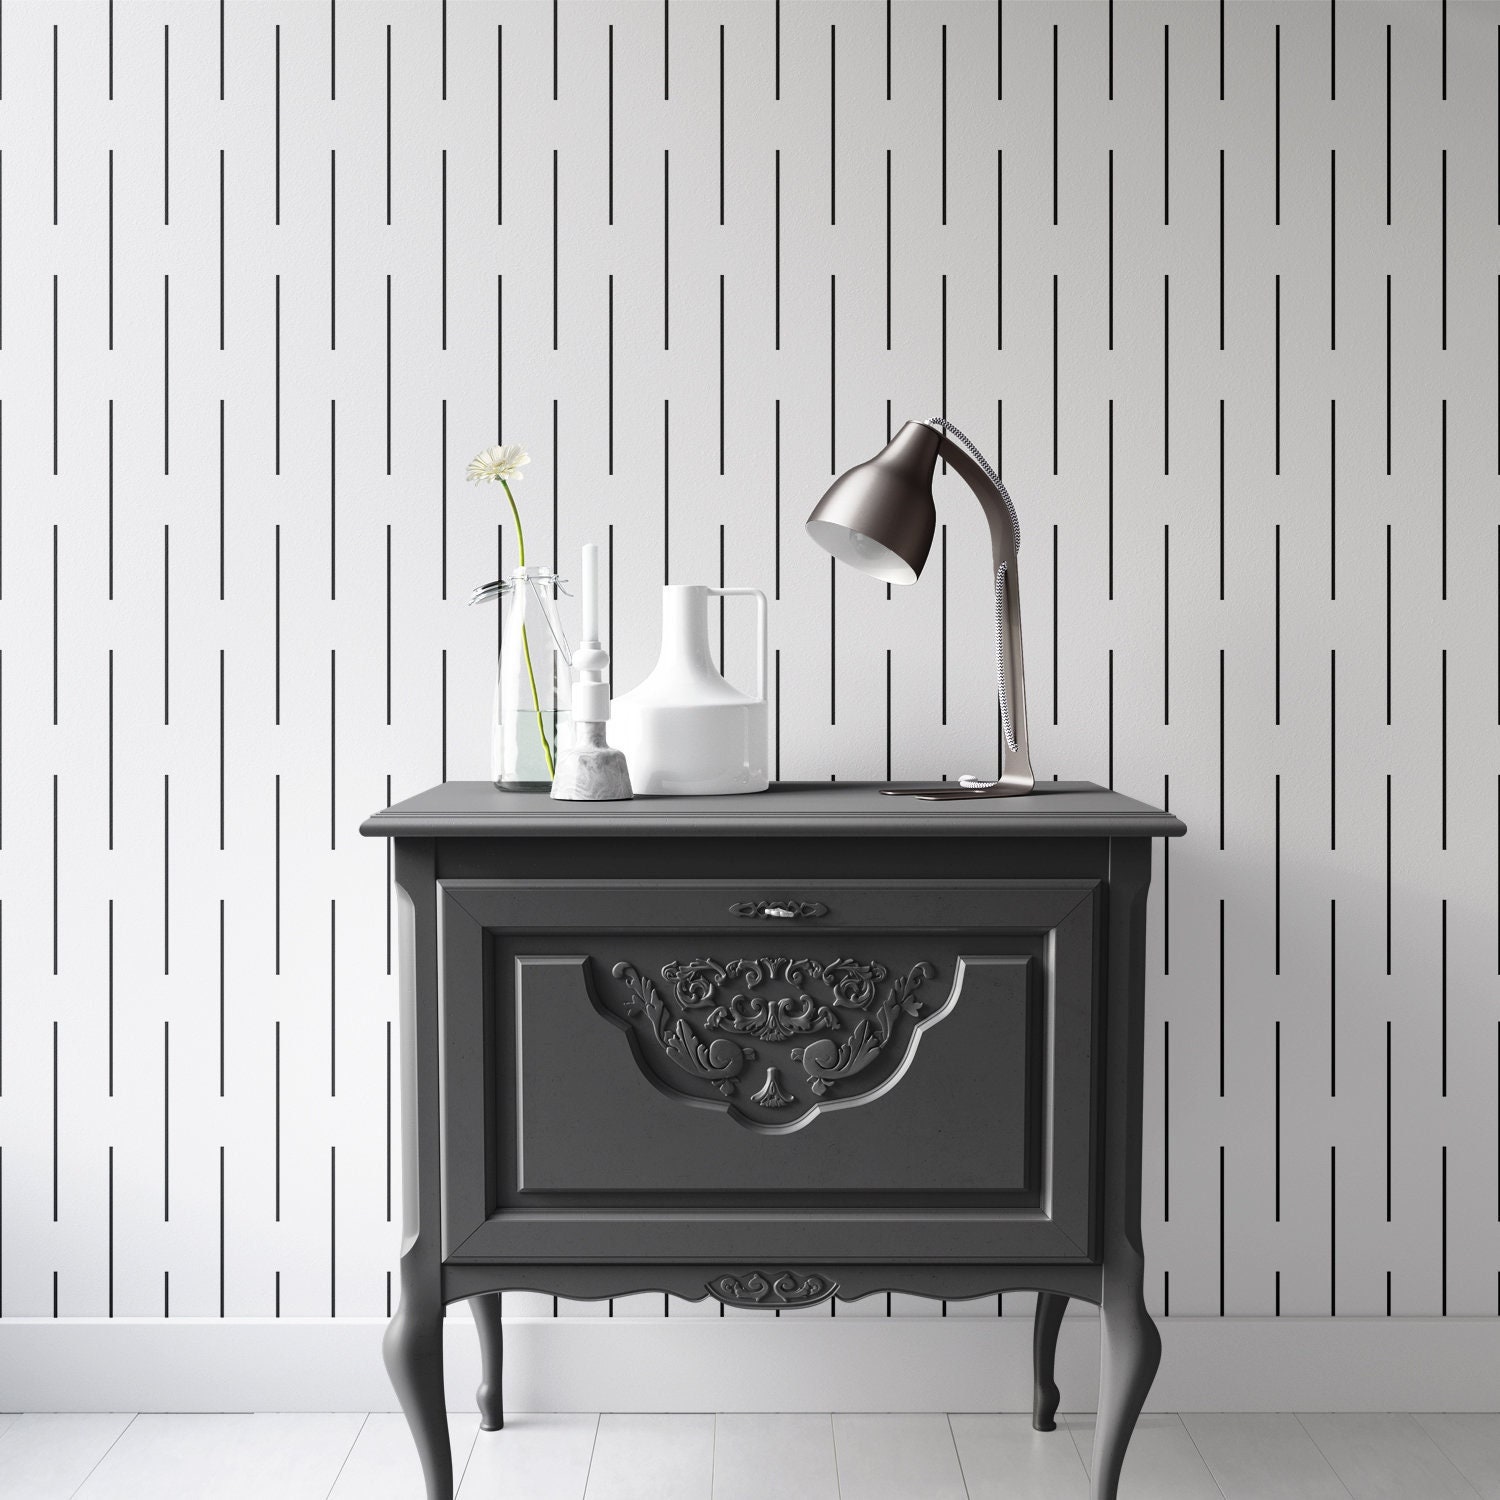 How to Hang Peel and Stick Wallpaper  Driven by Decor